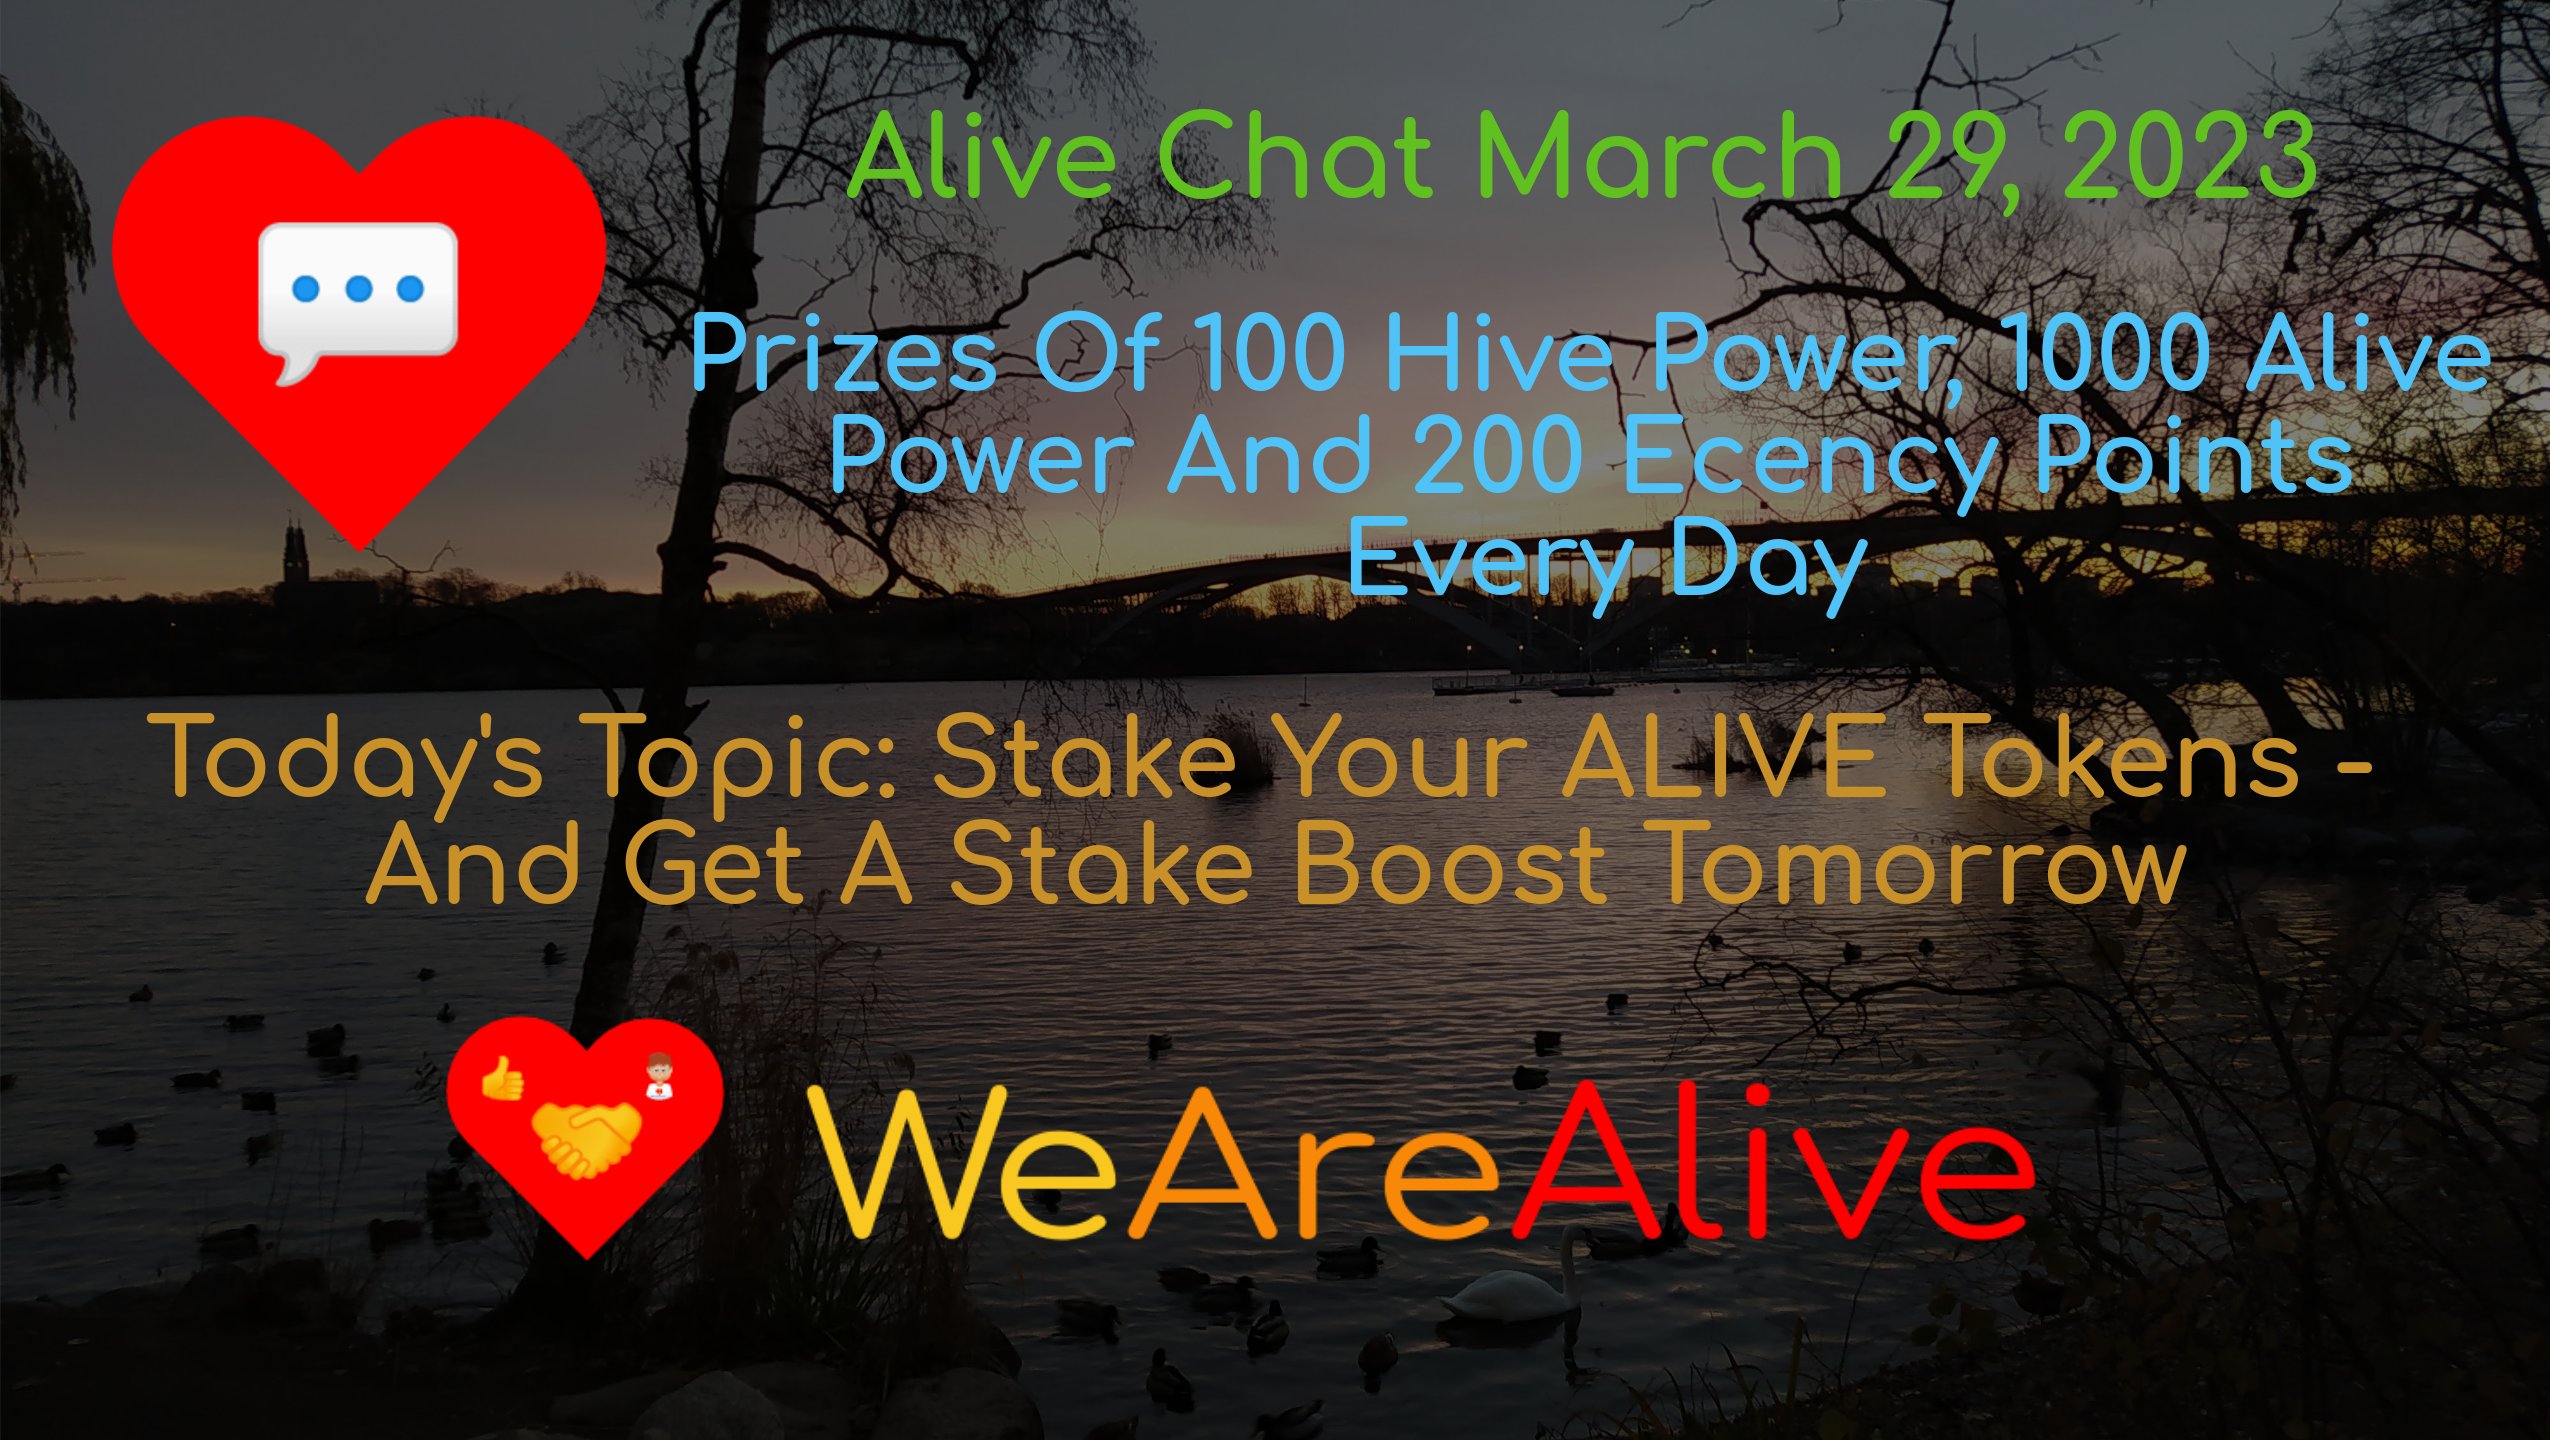 @alive.chat/alive-chat-march-29-2023